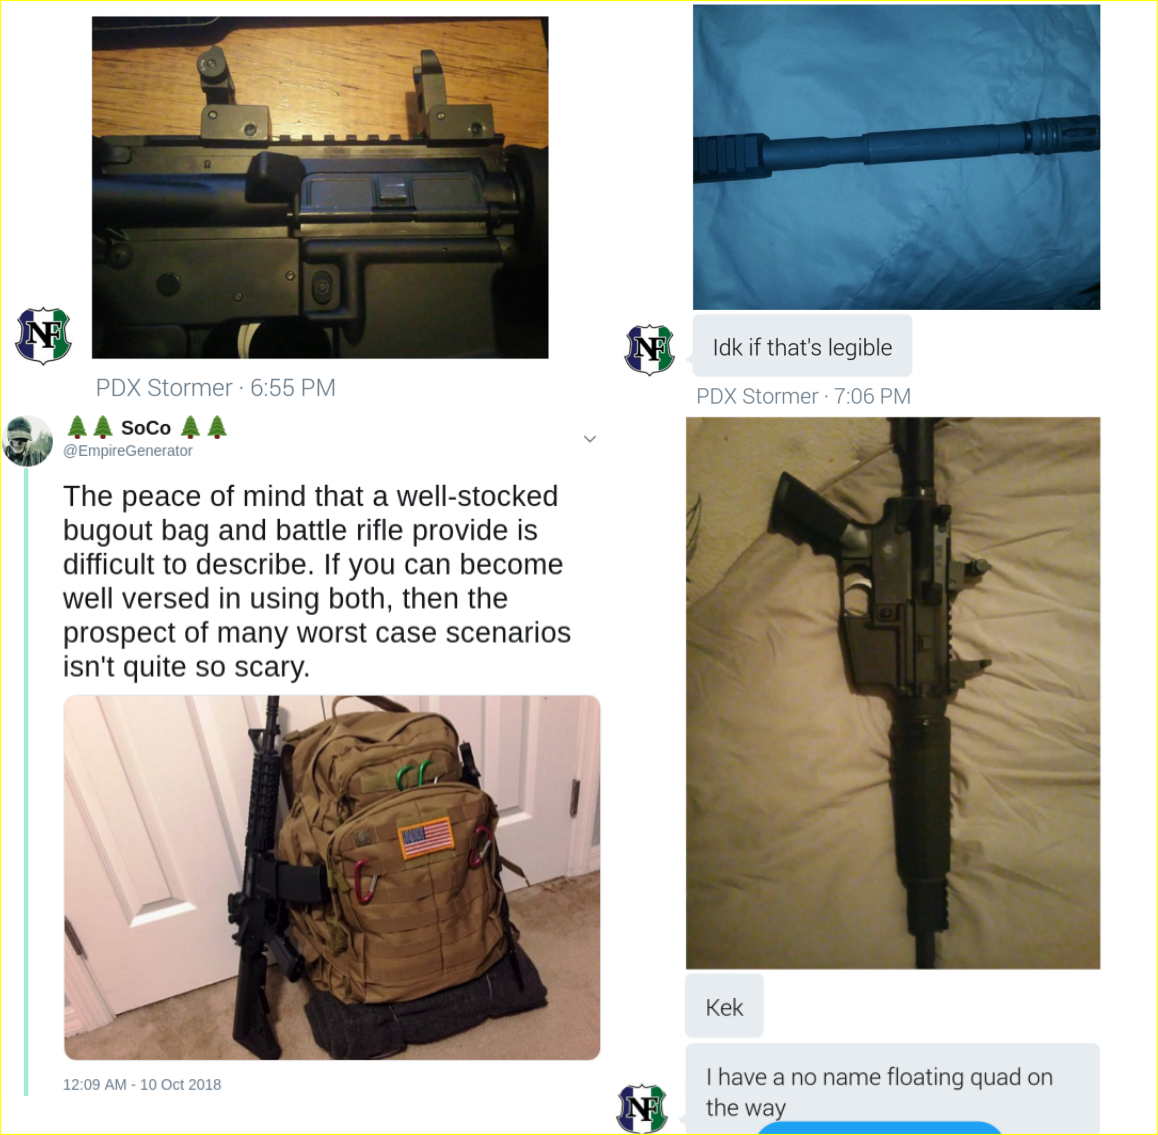 Blais shares images of his firearms and 'bugout bag' with fellow white supremacists